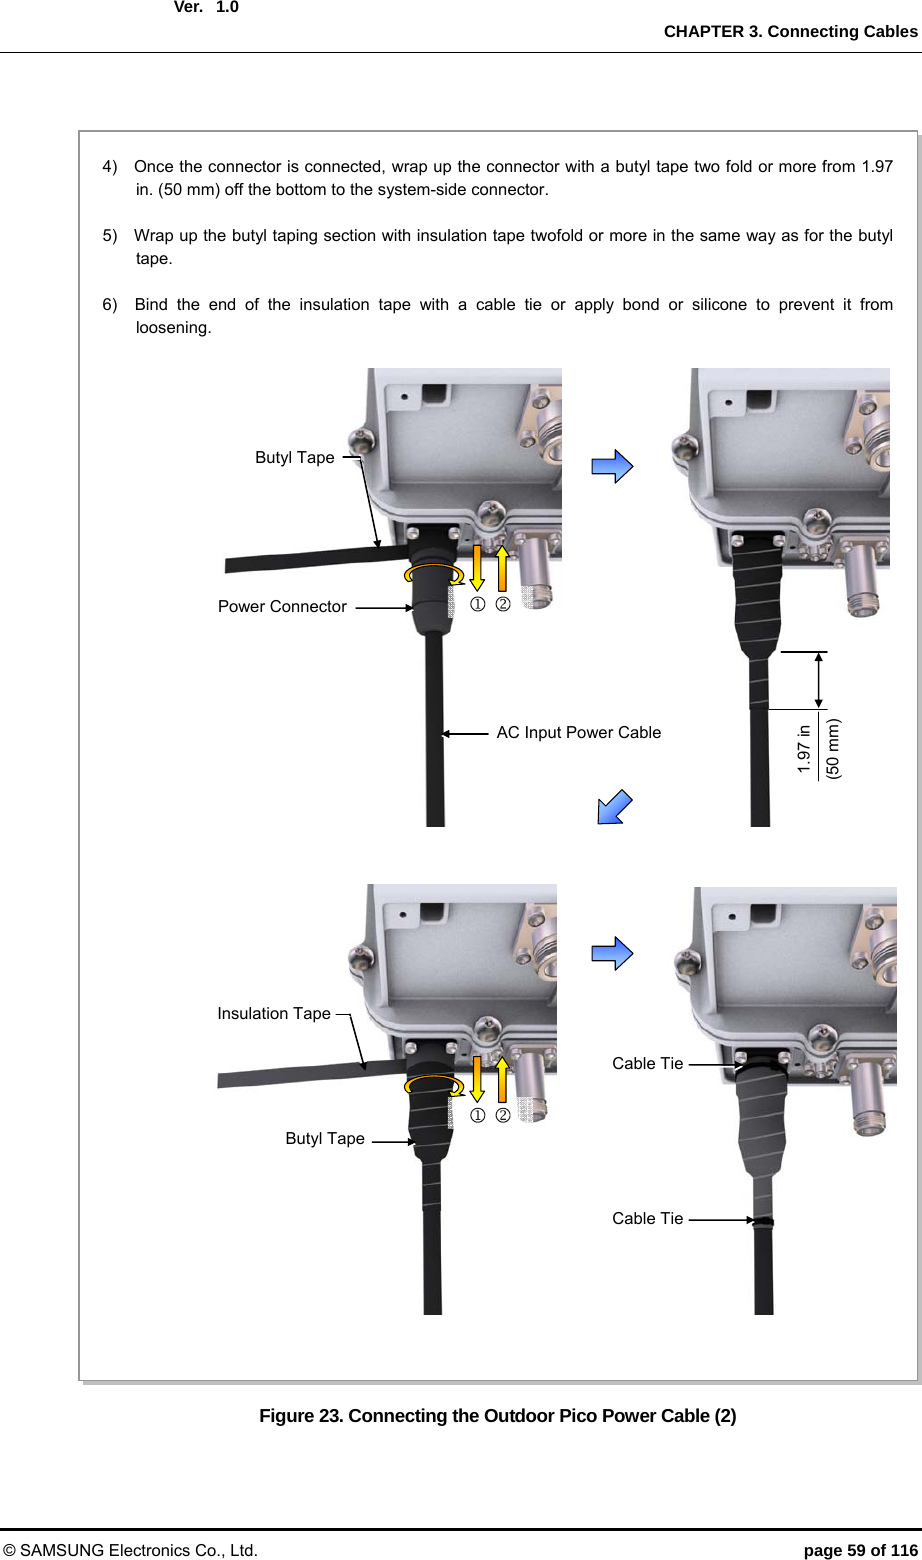  Ver.  CHAPTER 3. Connecting Cables © SAMSUNG Electronics Co., Ltd.  page 59 of 116 1.0  Figure 23. Connecting the Outdoor Pico Power Cable (2) Power ConnectorAC Input Power Cable 4)    Once the connector is connected, wrap up the connector with a butyl tape two fold or more from 1.97 in. (50 mm) off the bottom to the system-side connector.    5)    Wrap up the butyl taping section with insulation tape twofold or more in the same way as for the butyl tape.  6)  Bind the end of the insulation tape with a cable tie or apply bond or silicone to prevent it from loosening.    Butyl Tape1.97 in (50 mm) Butyl TapeCable TieInsulation TapeCable Tie   